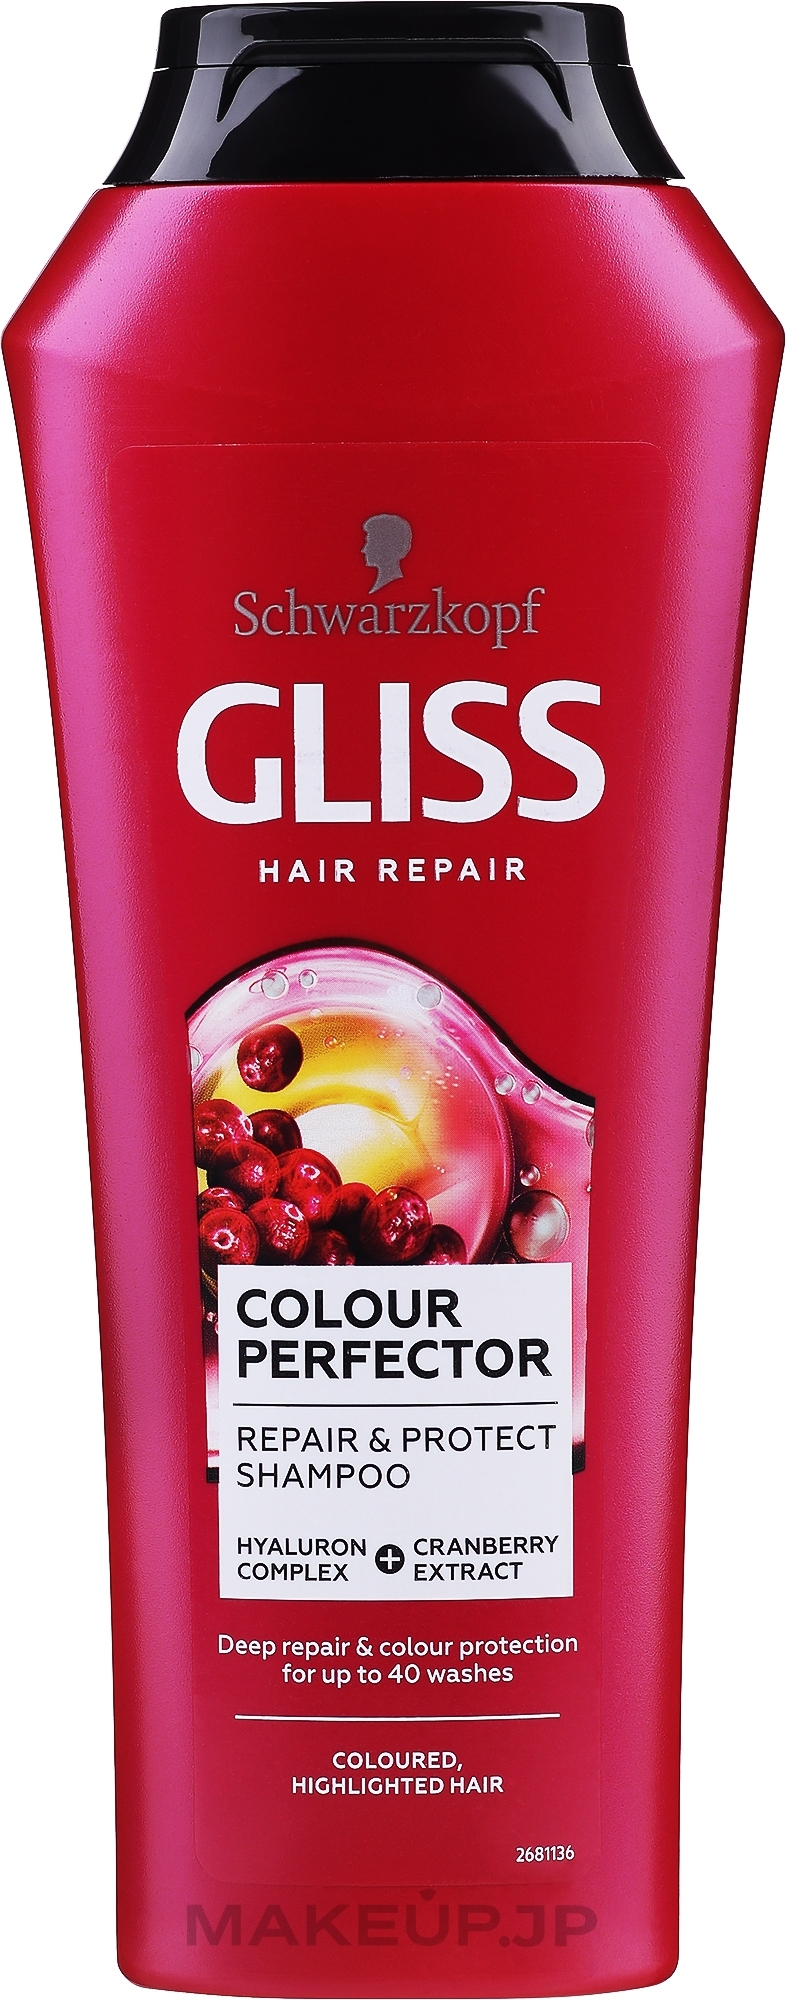 Shampoo for Colored and Bleached Hair - Gliss Color Perfector Repair & Protect Shampoo — photo 250 ml